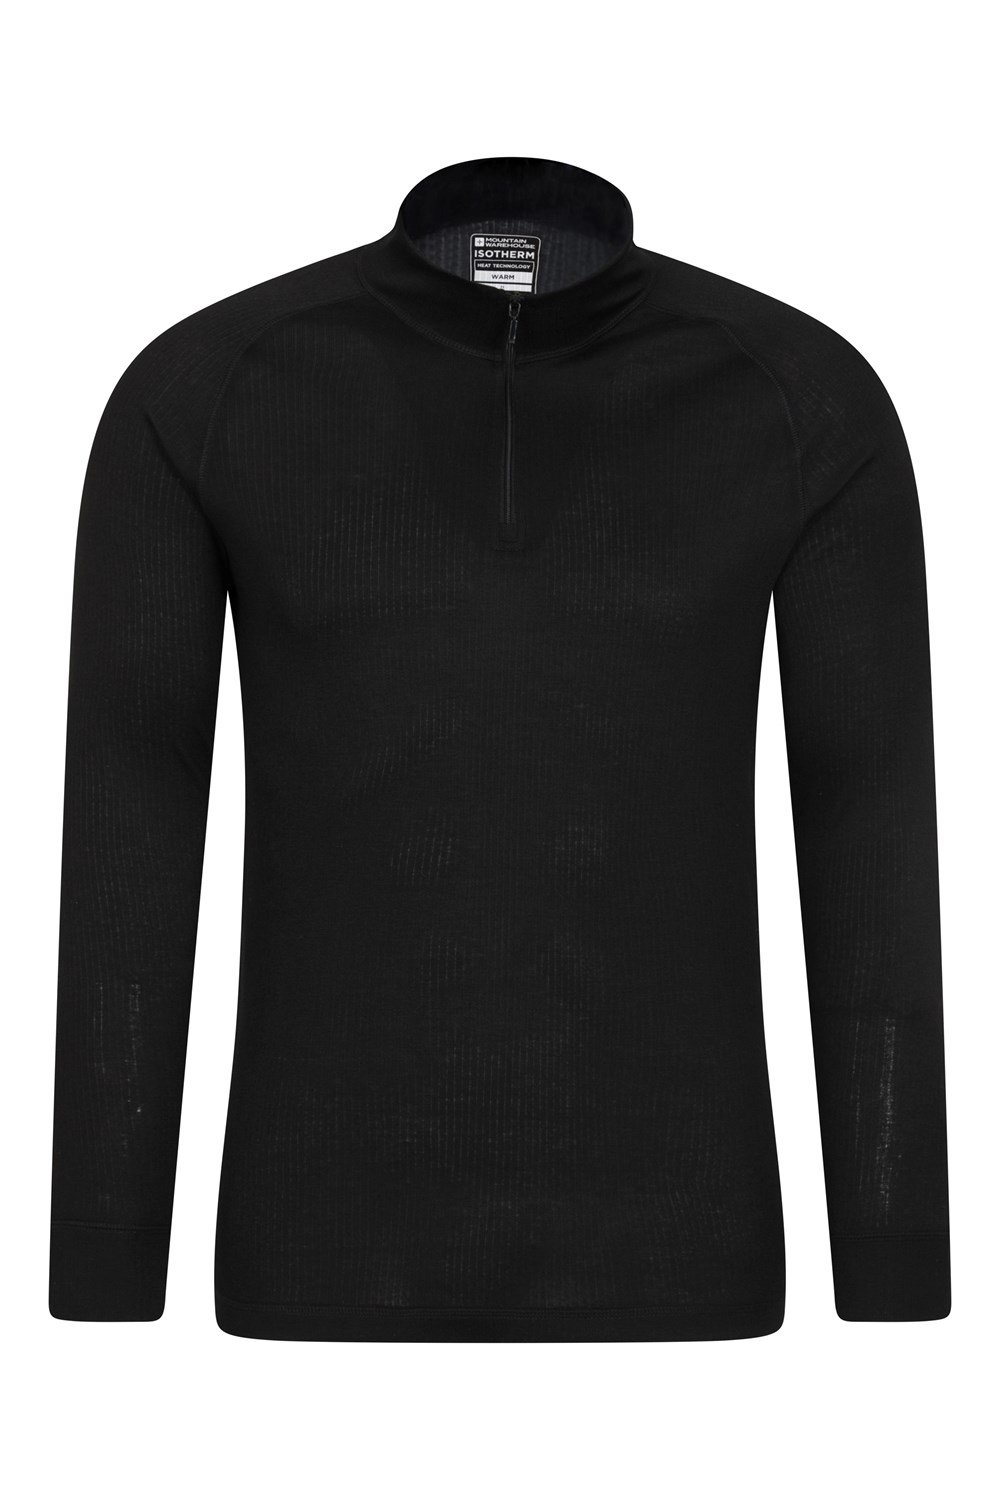 Mountain Warehouse Mens Long Sleeved Round Neck Top Thermal